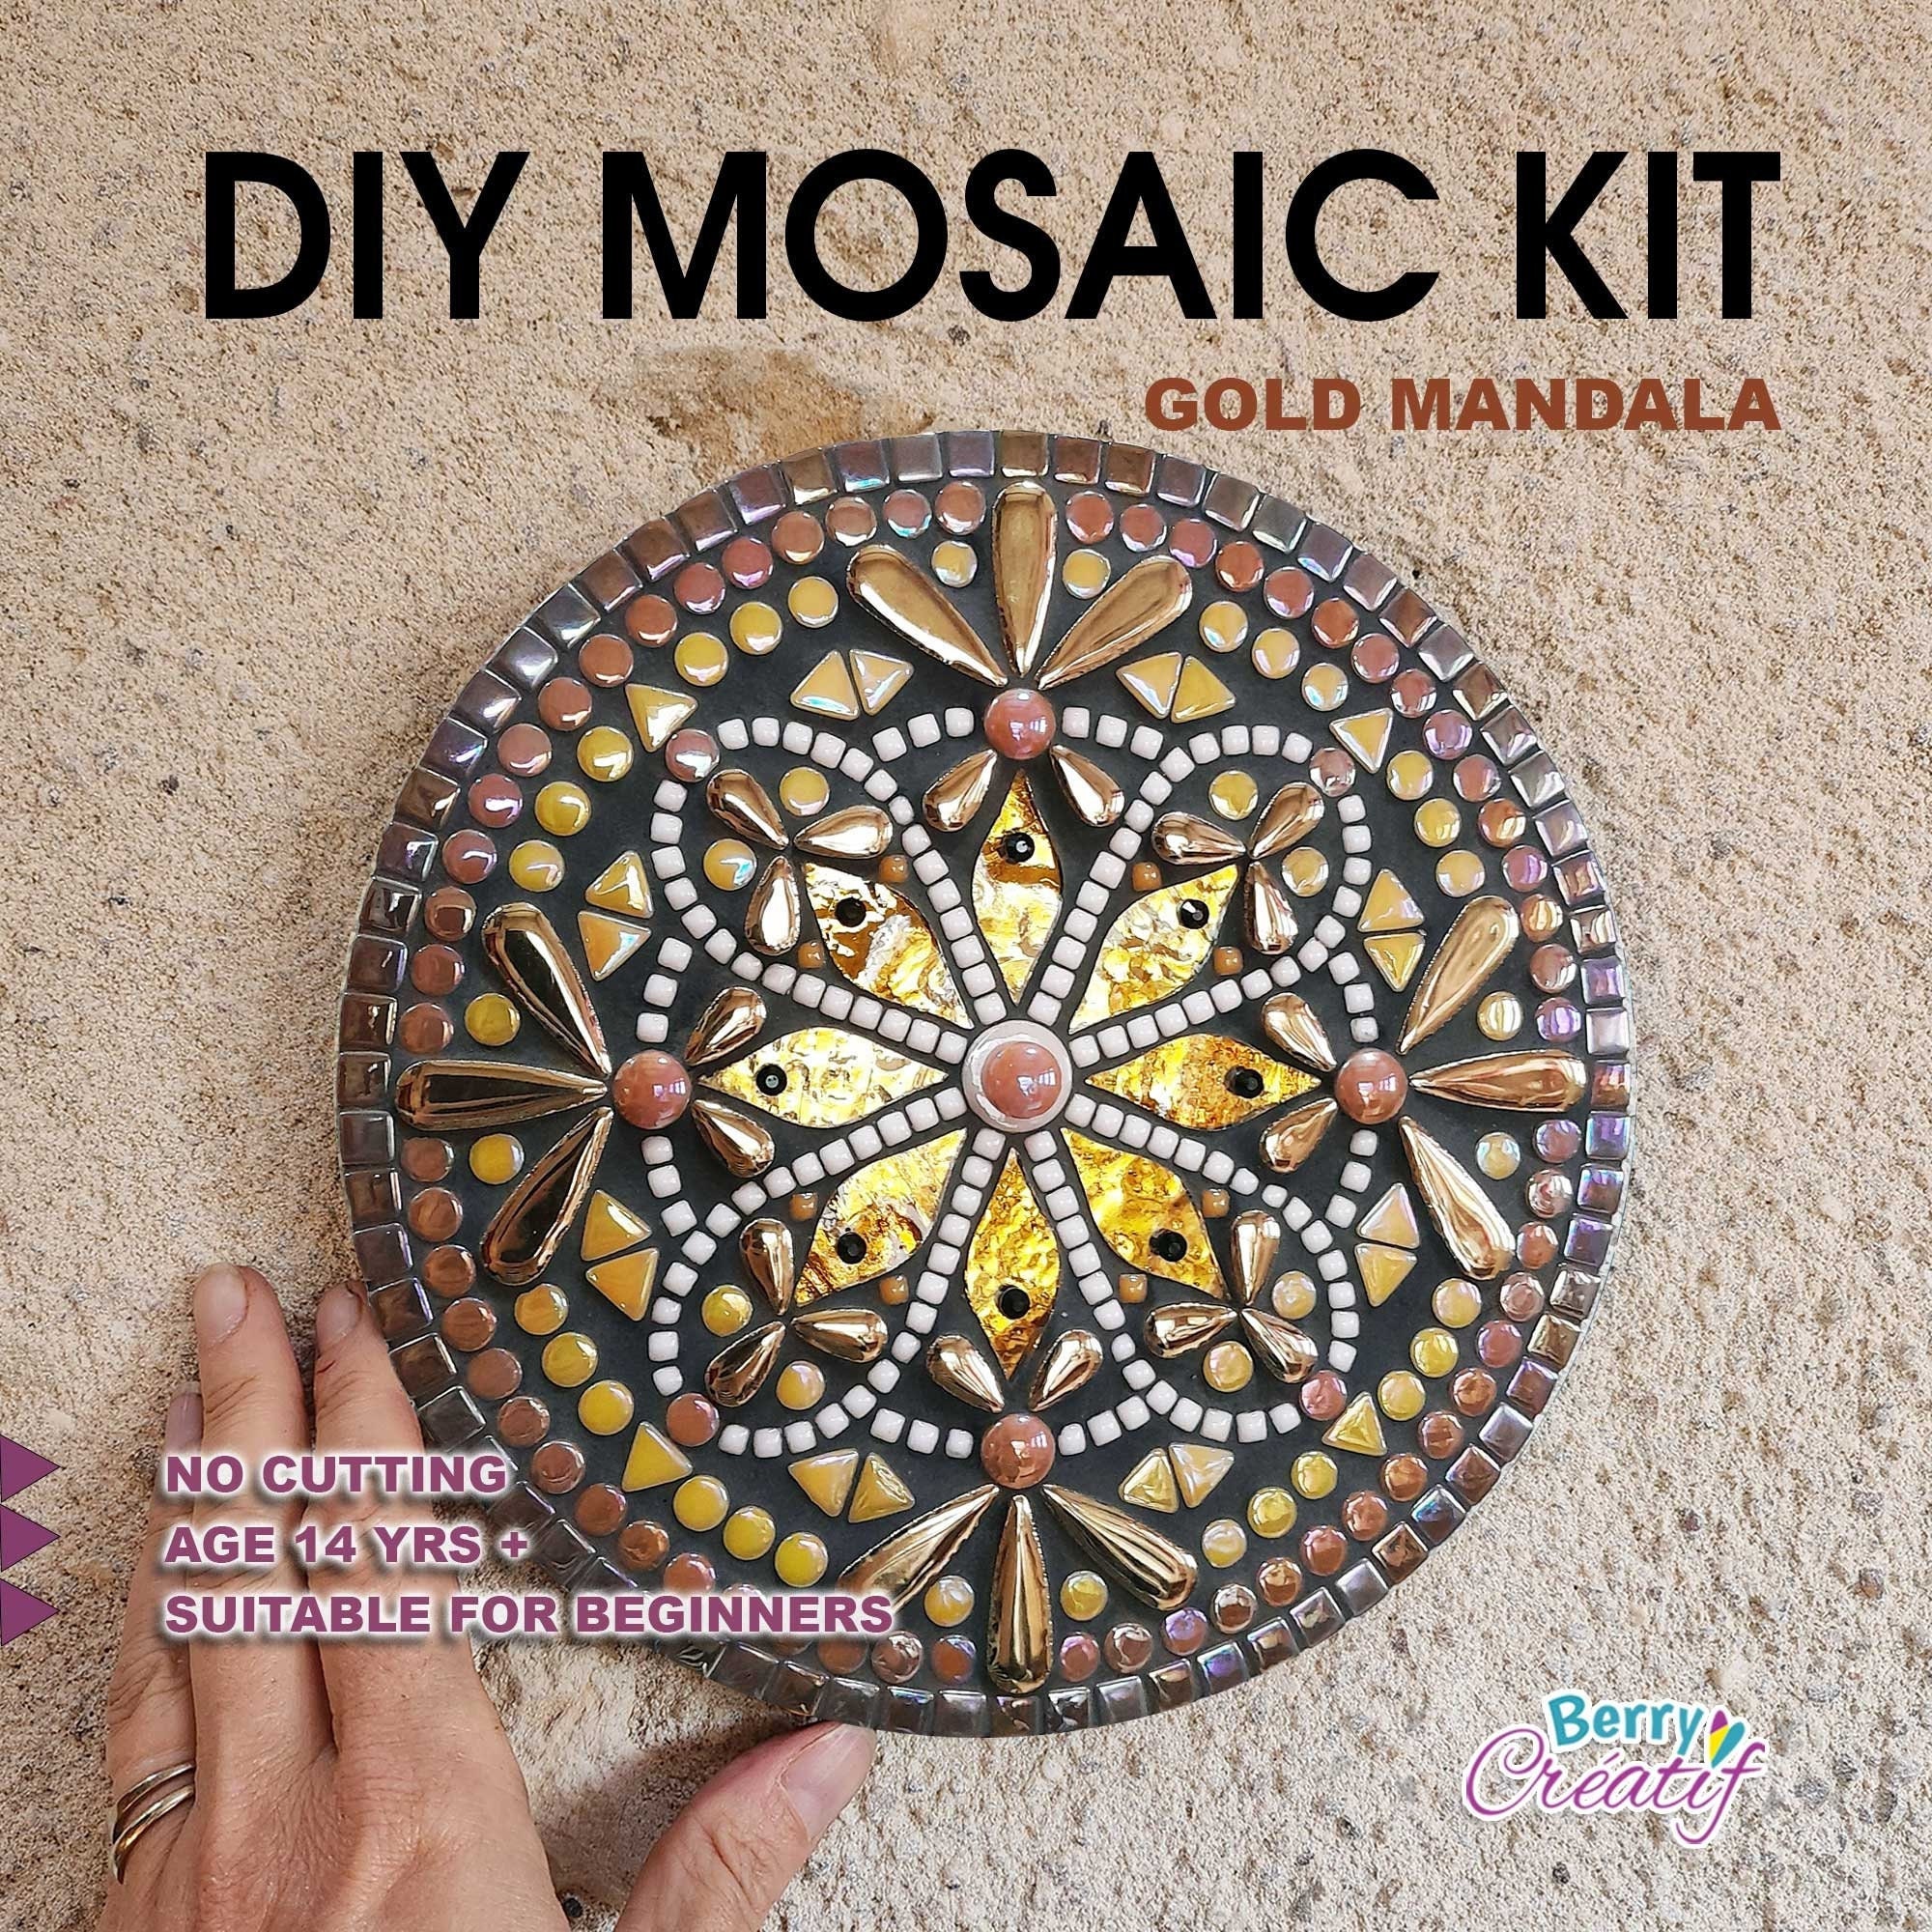 Mosaic Kit for Adults, Best Diy Mosaic Kit, Complete Arts and Crafts Adult  Kit With Mosaic Tiles, Tools and Grout, High Quality Hand Crafted 